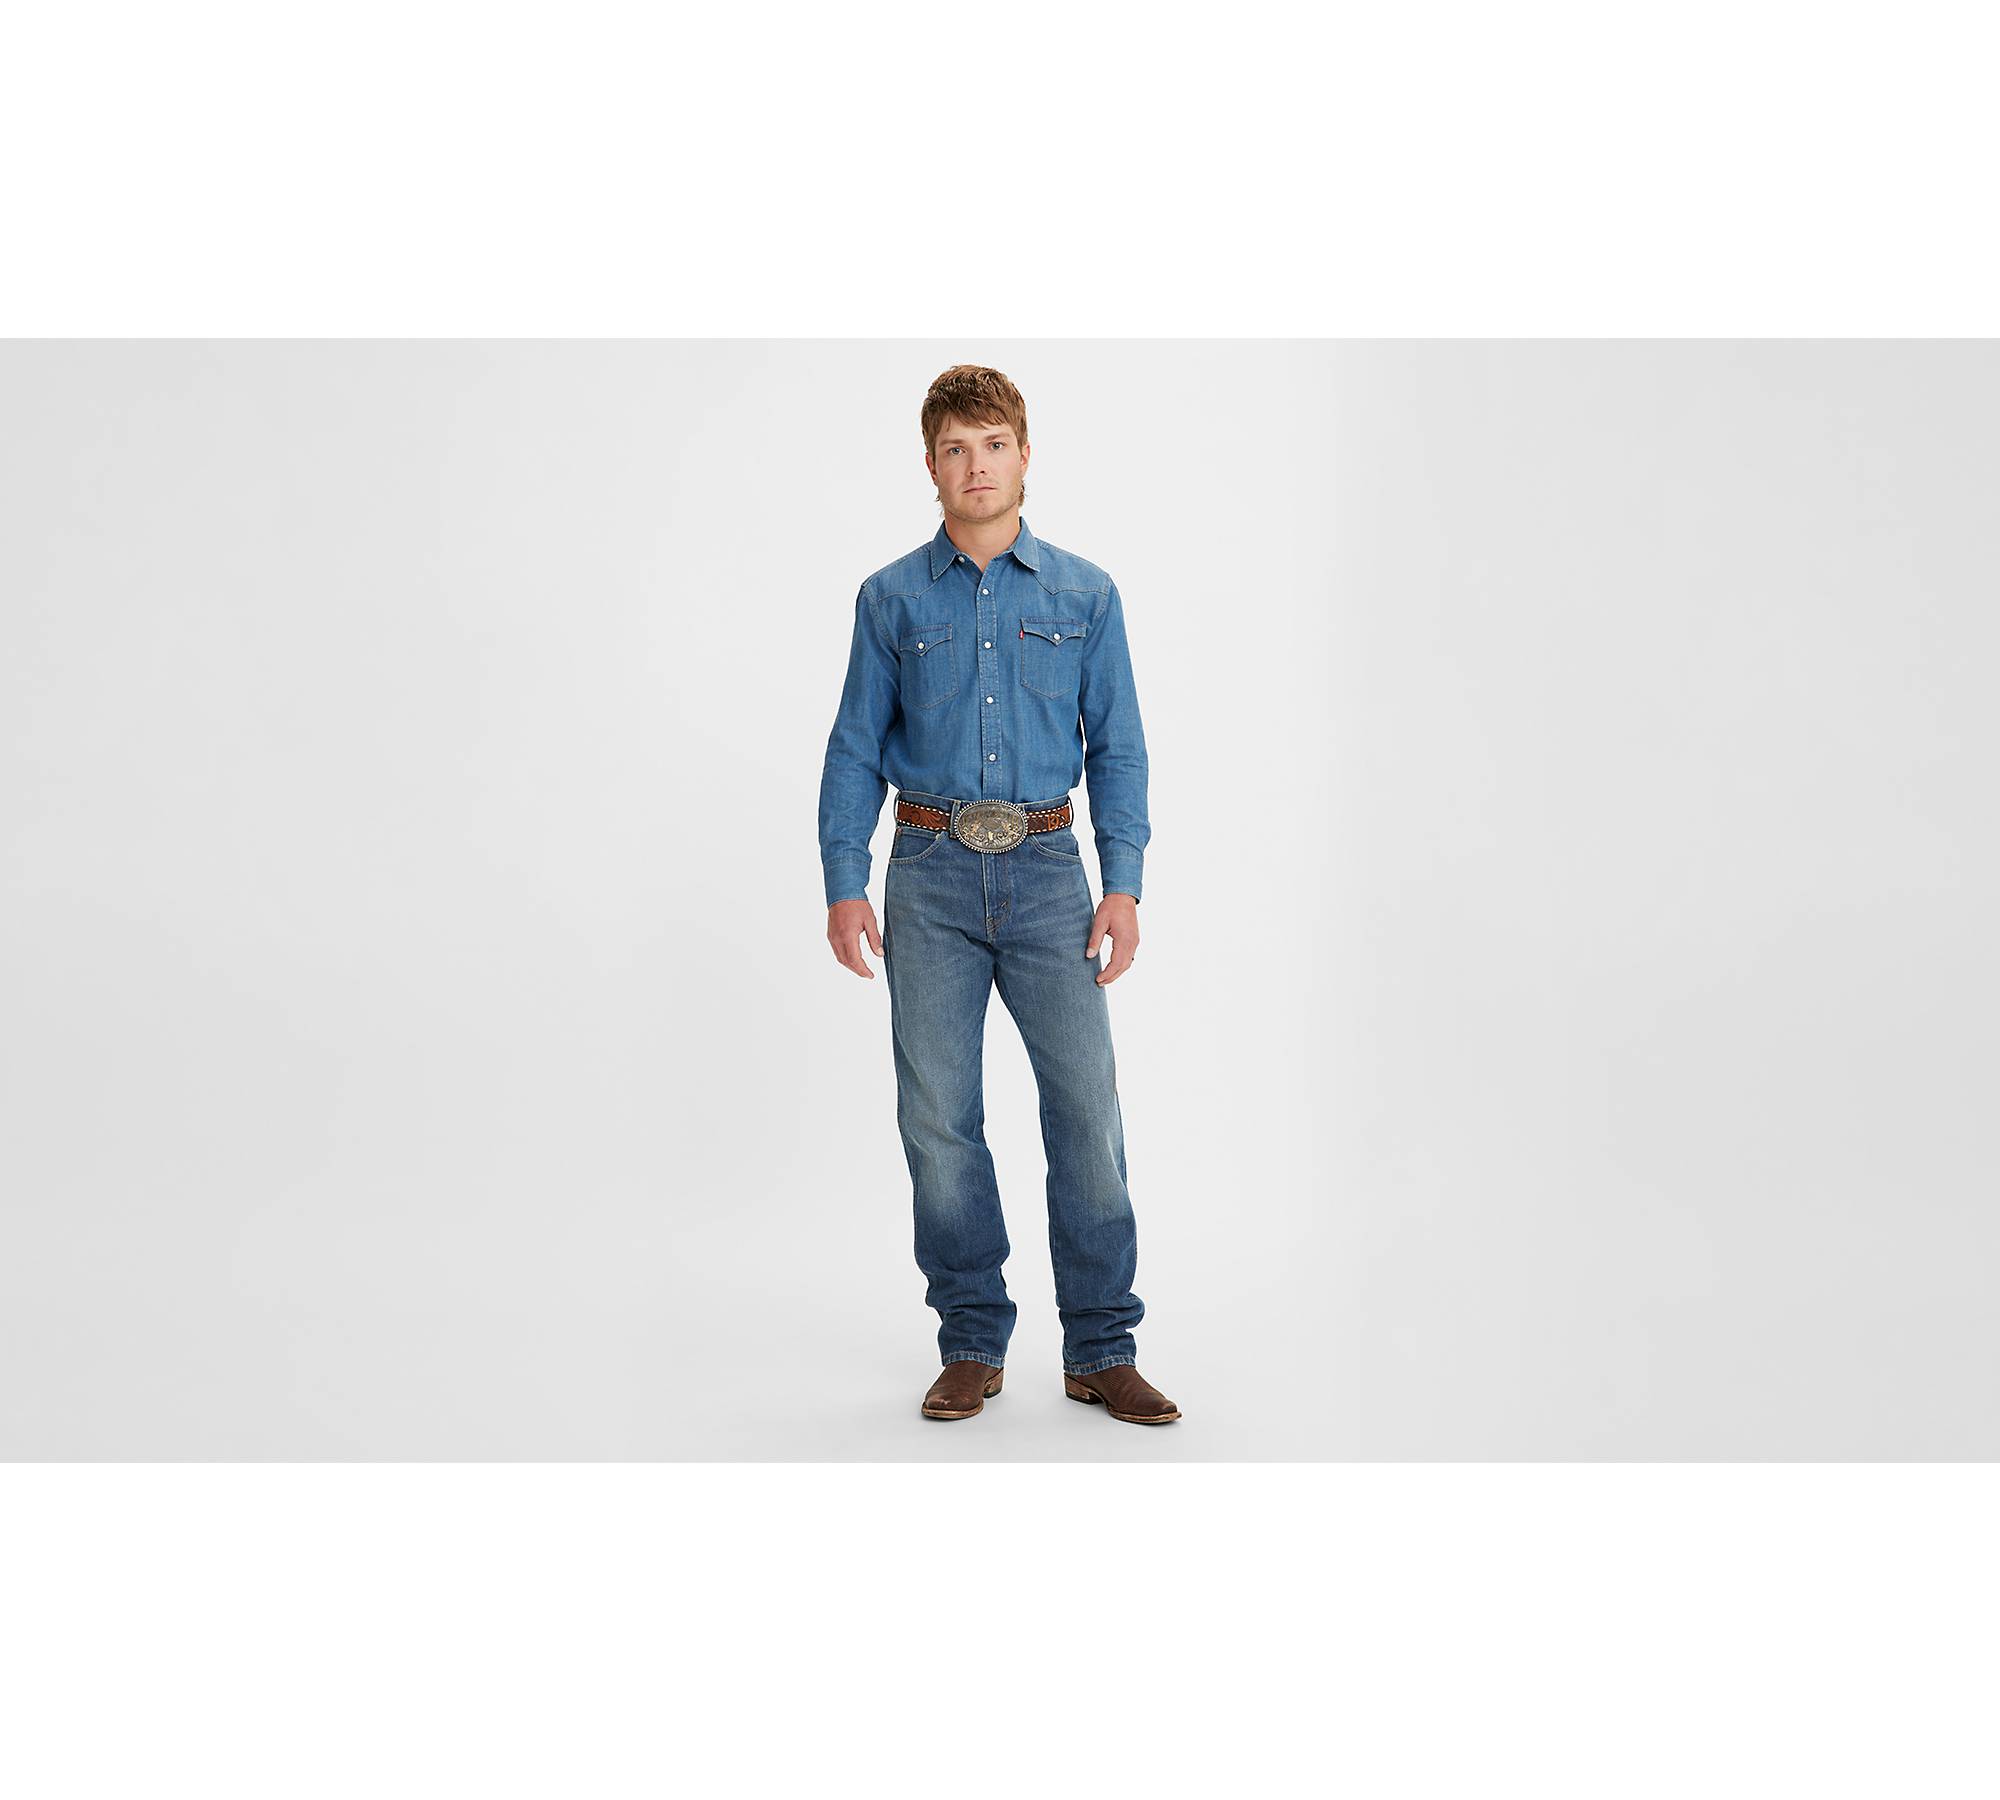 Wear And Tear Straight Jeans - Light Wash